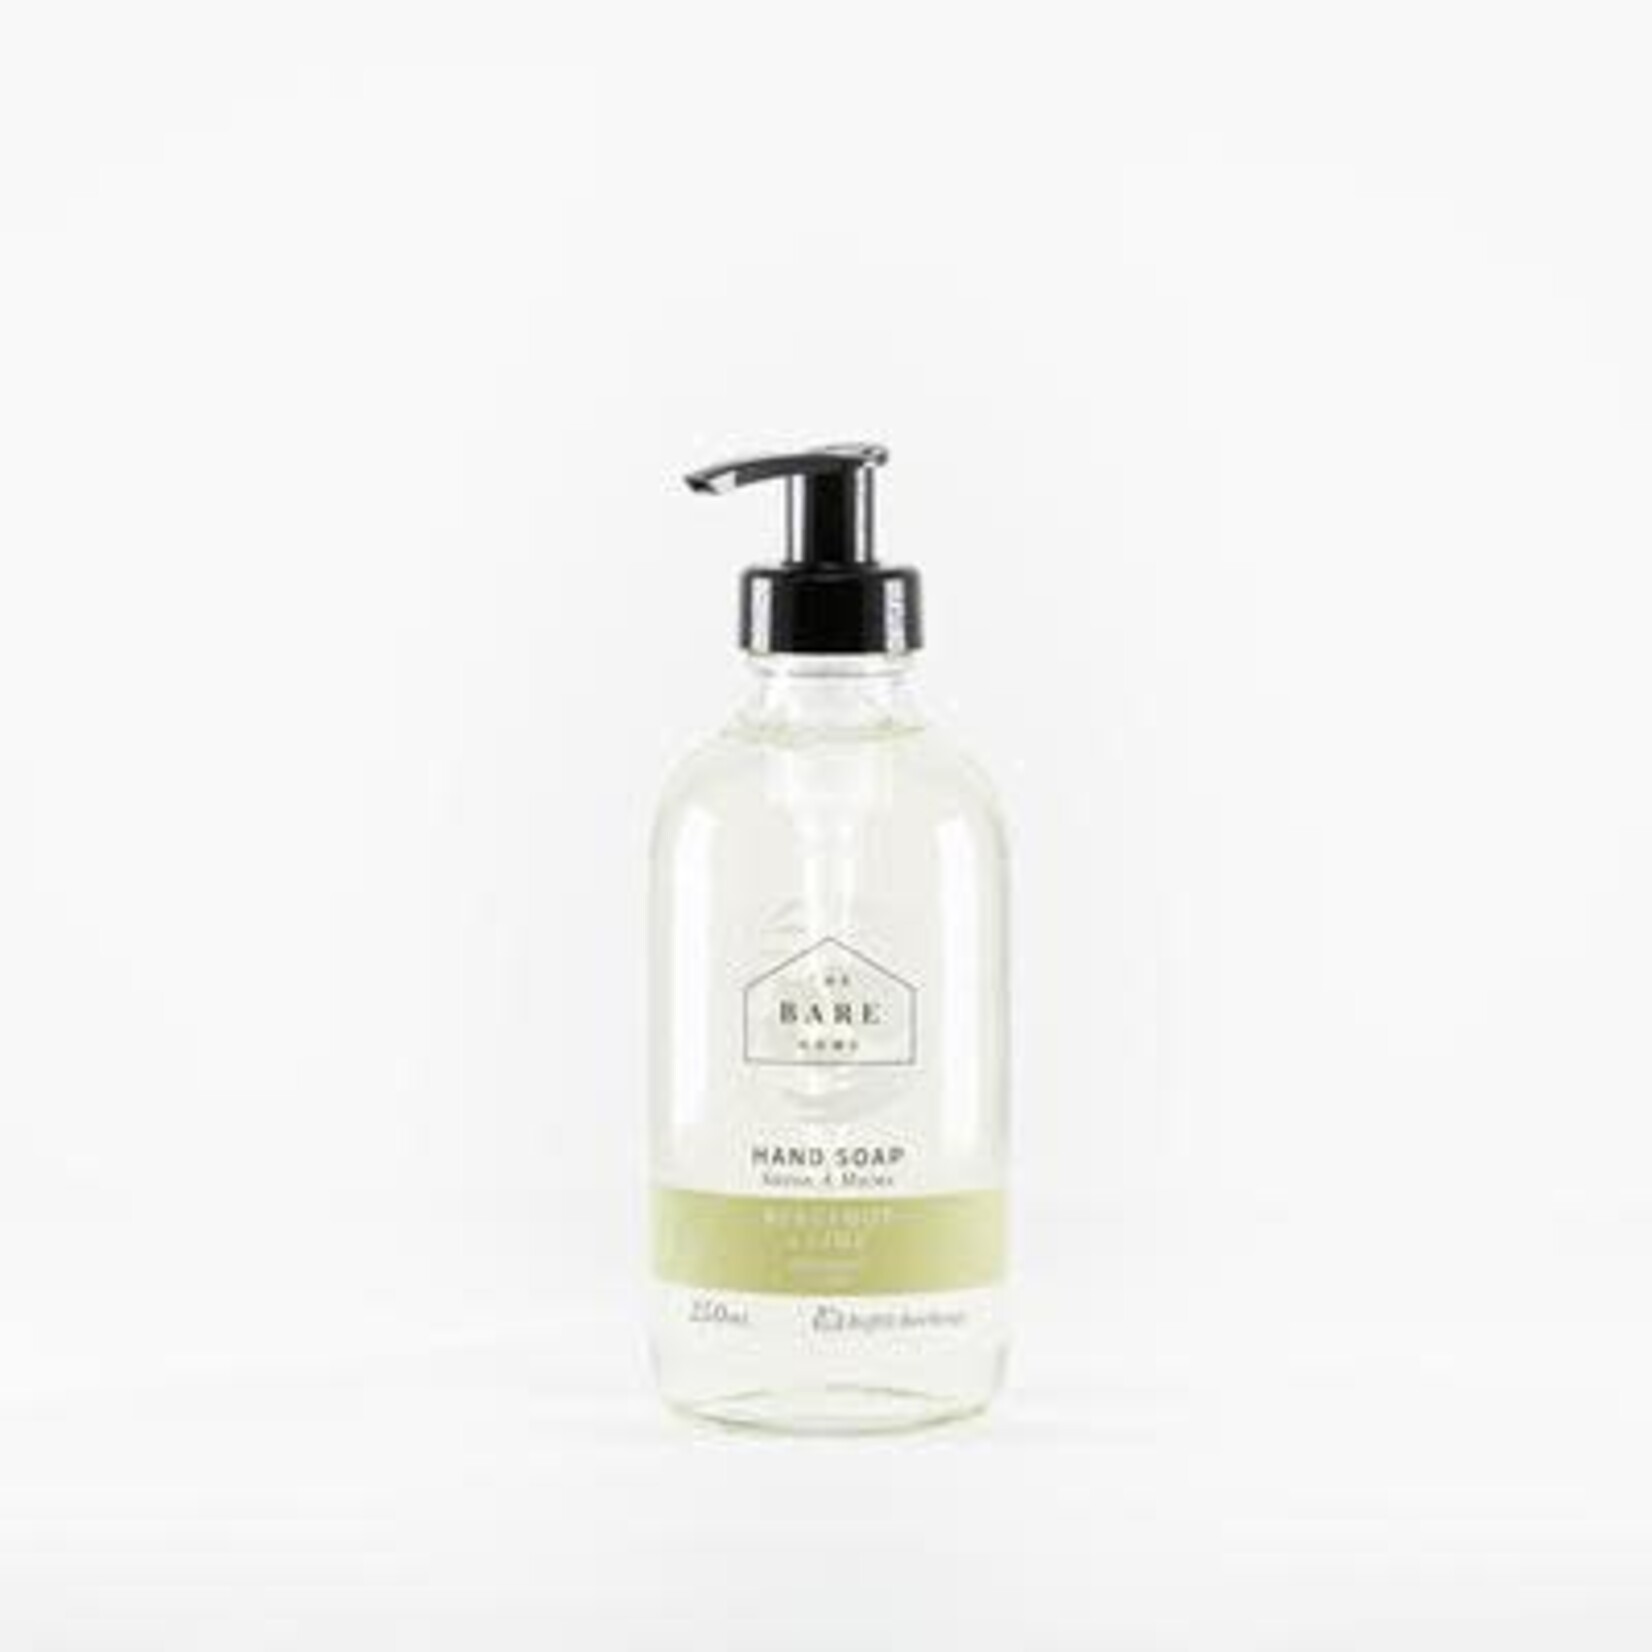 The Bare Home Bare Home Hand Soap 236ml Bergamot and Lime